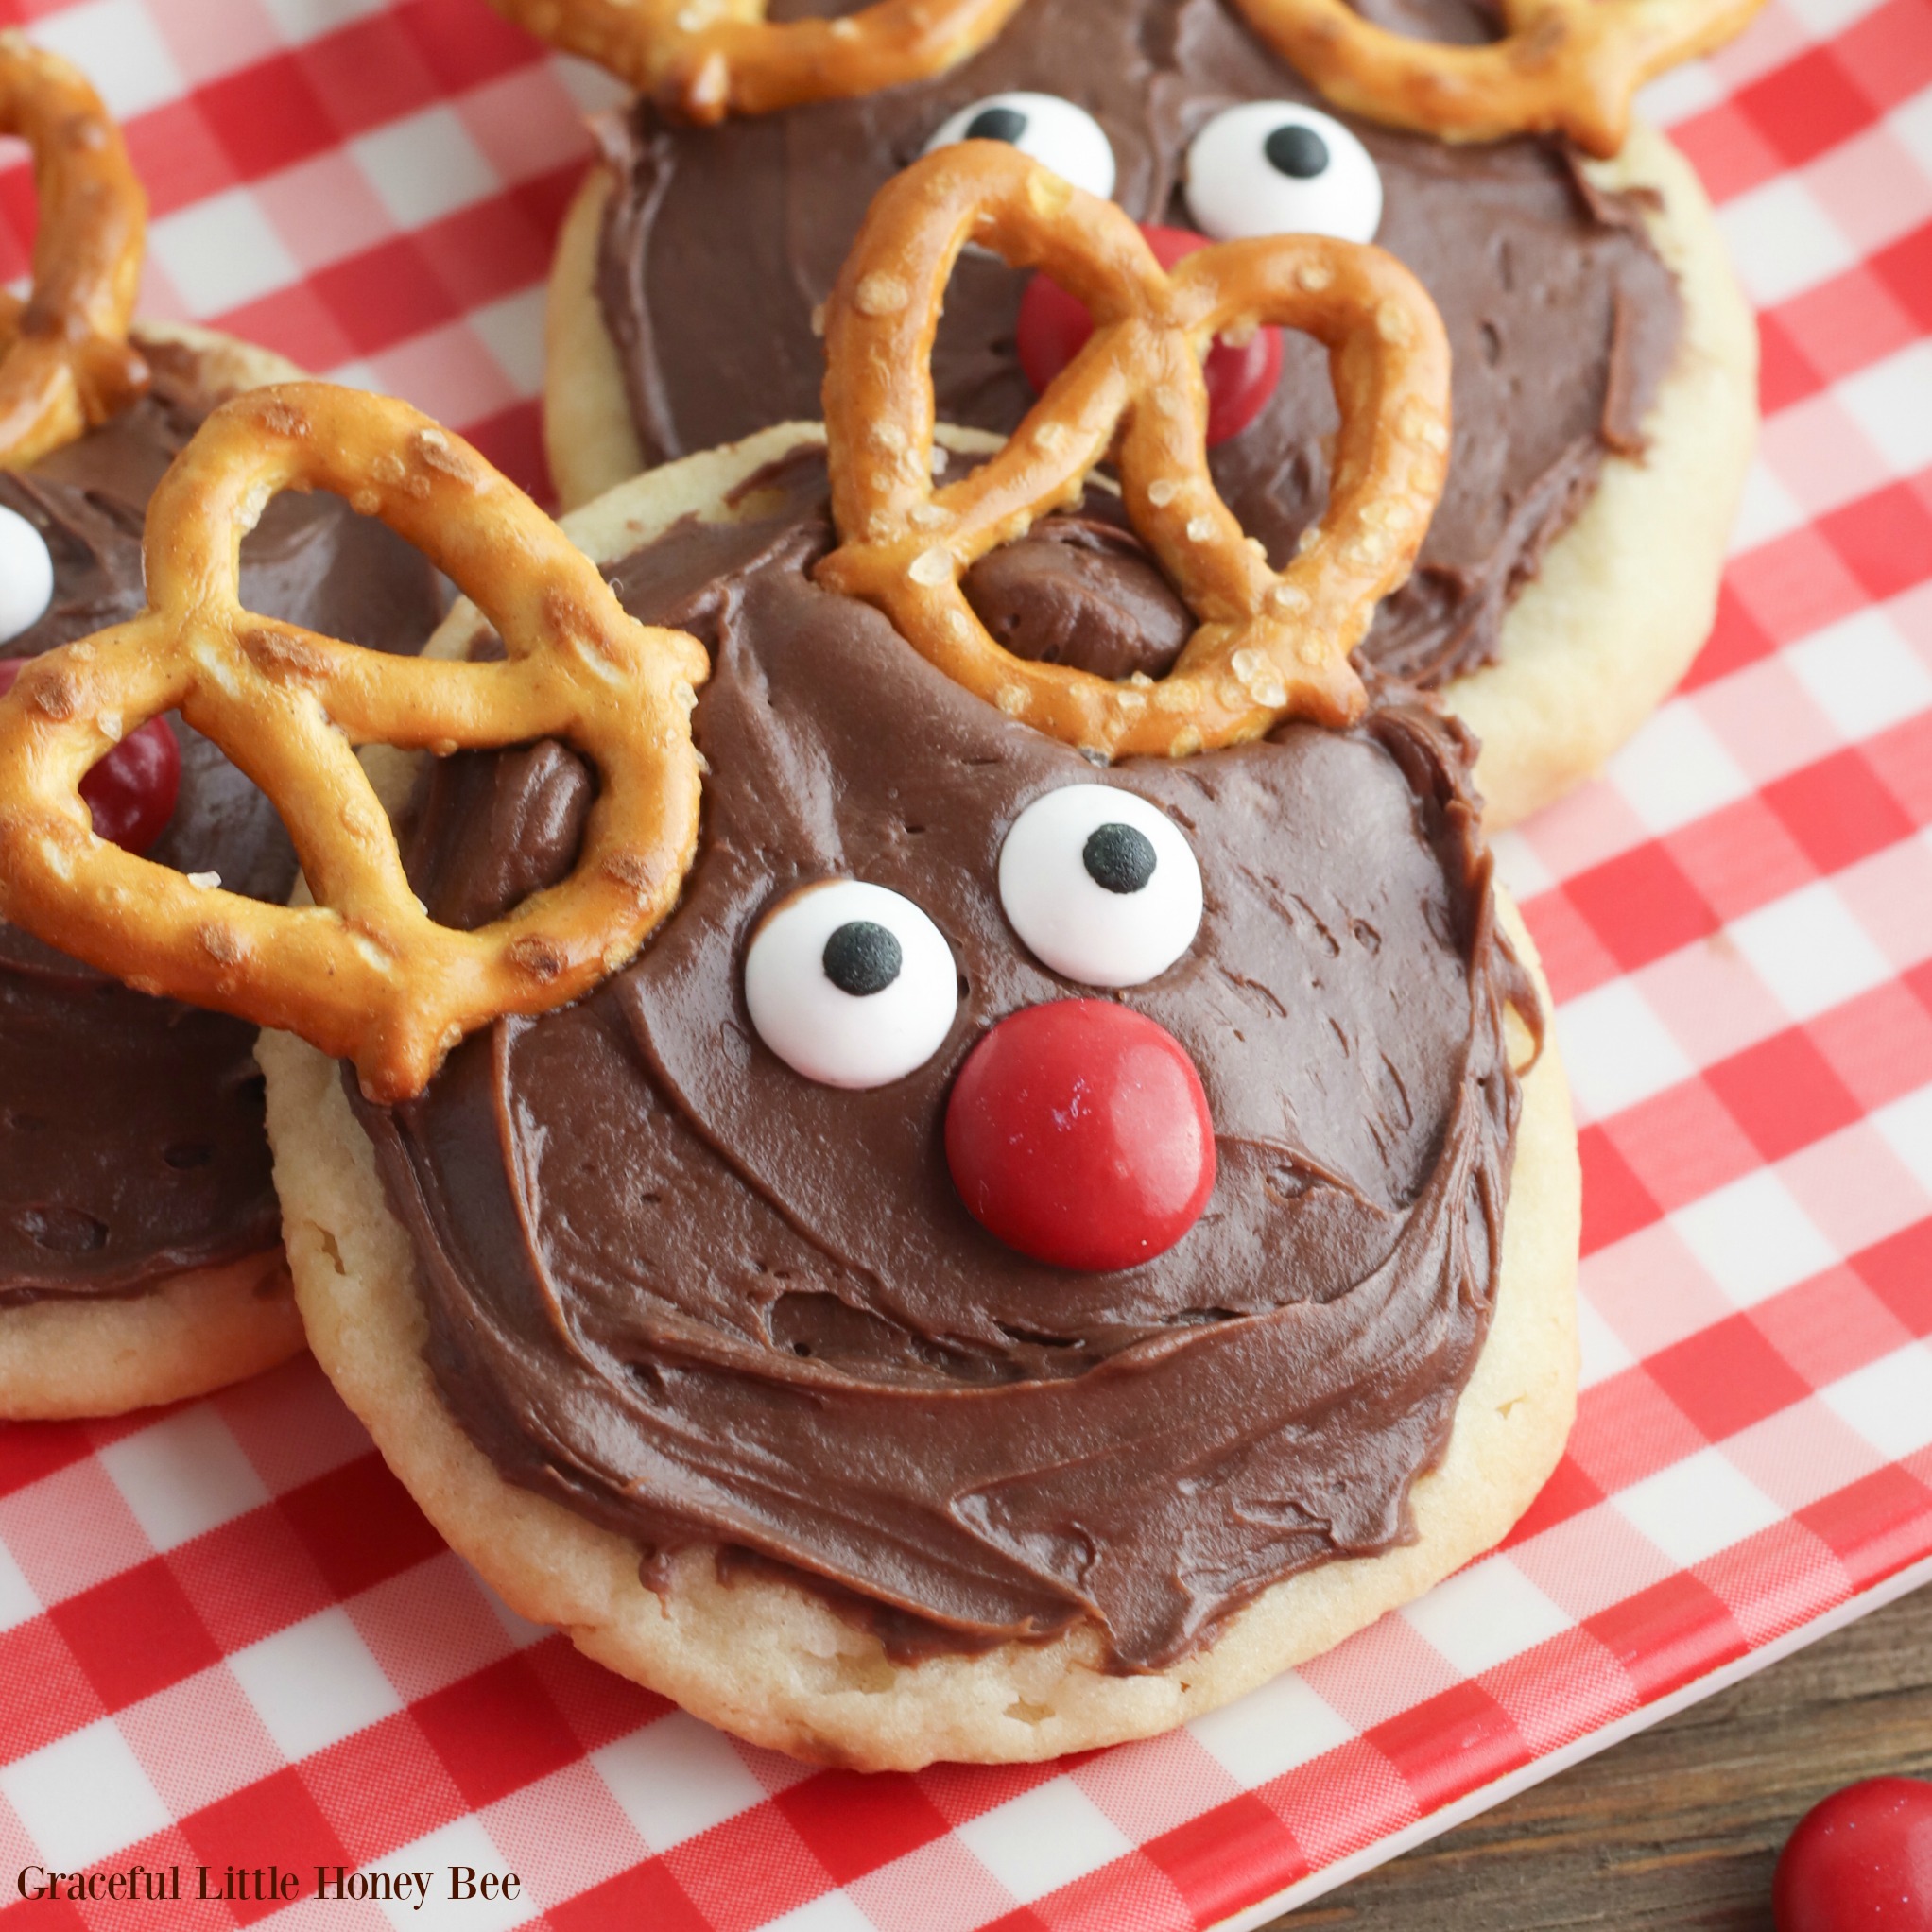 A sugar cookie with chocolate frosting, candy eyes, nose and pretzel ears that makes it look like a reindeer.